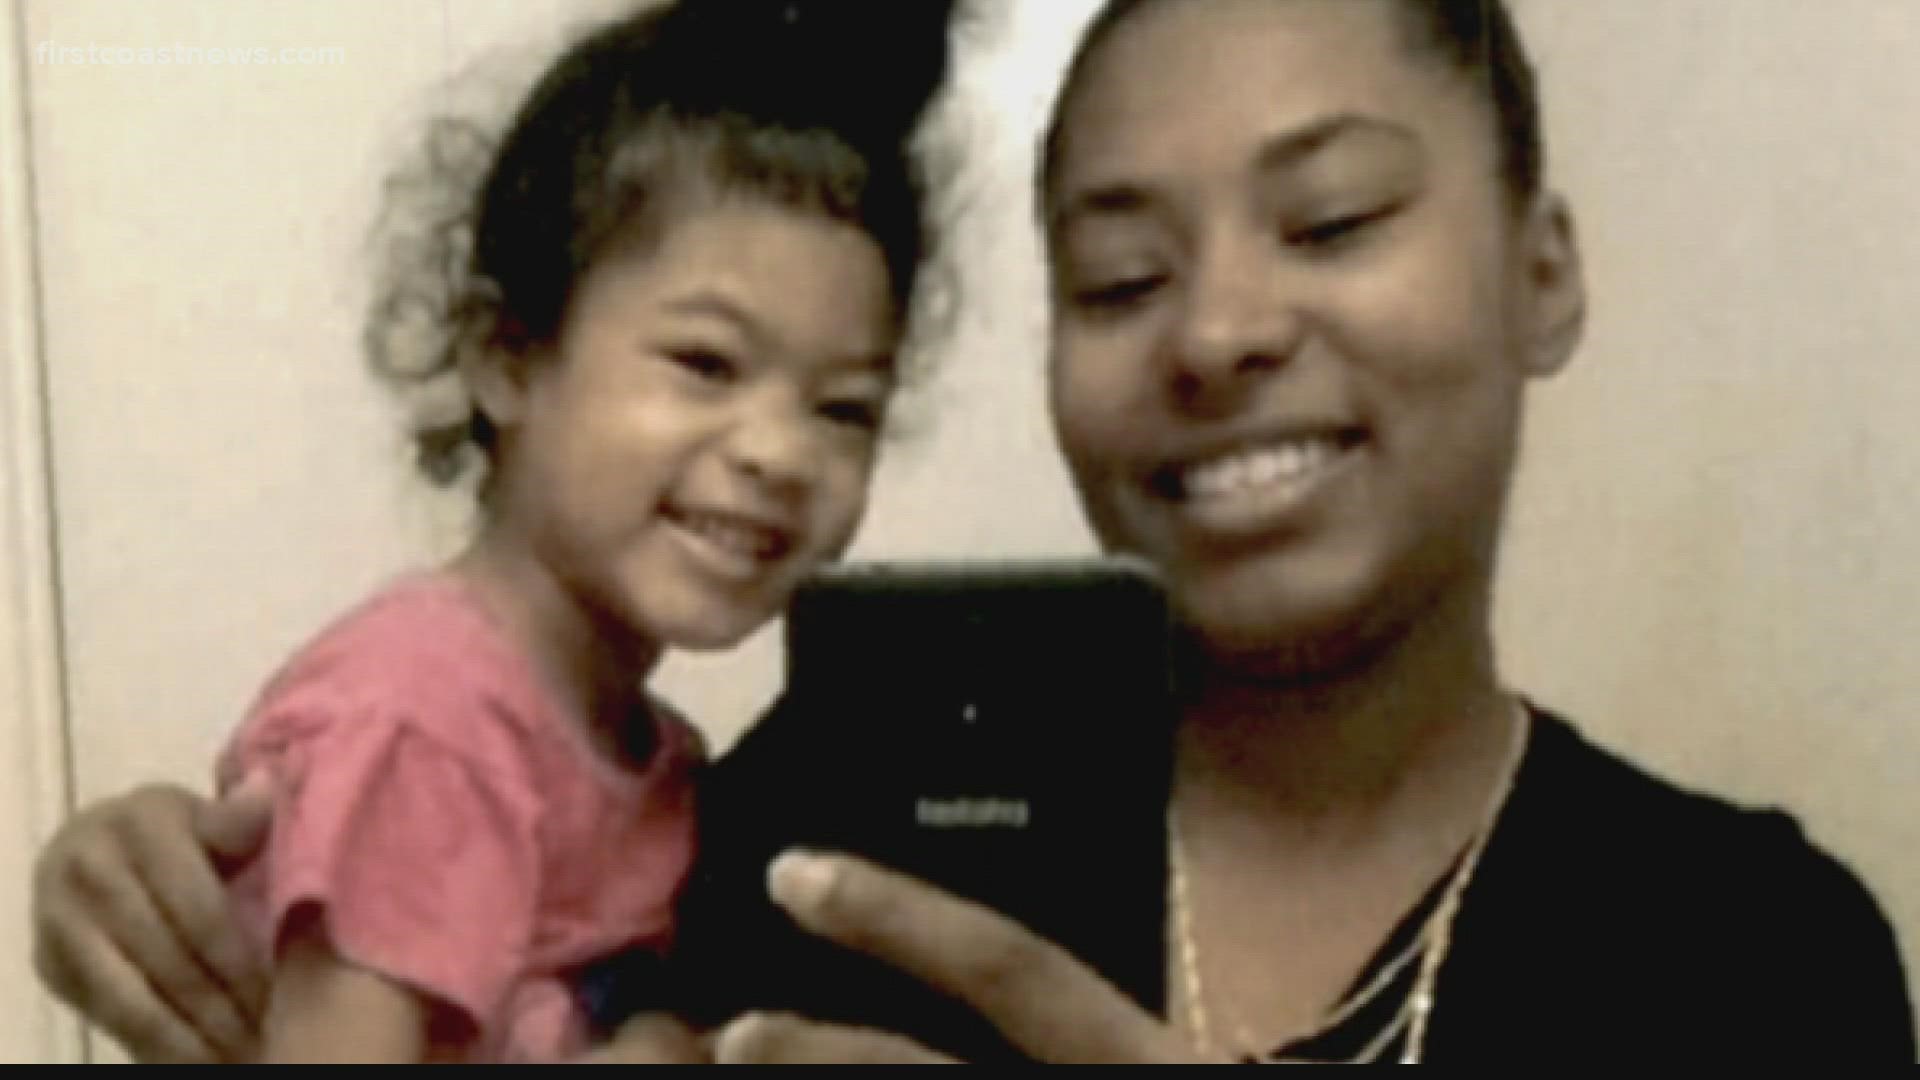 Family members of 5-year-old Vanity, who was killed in a high speed chase, say the little girl didn't live with her mom who is being charged.